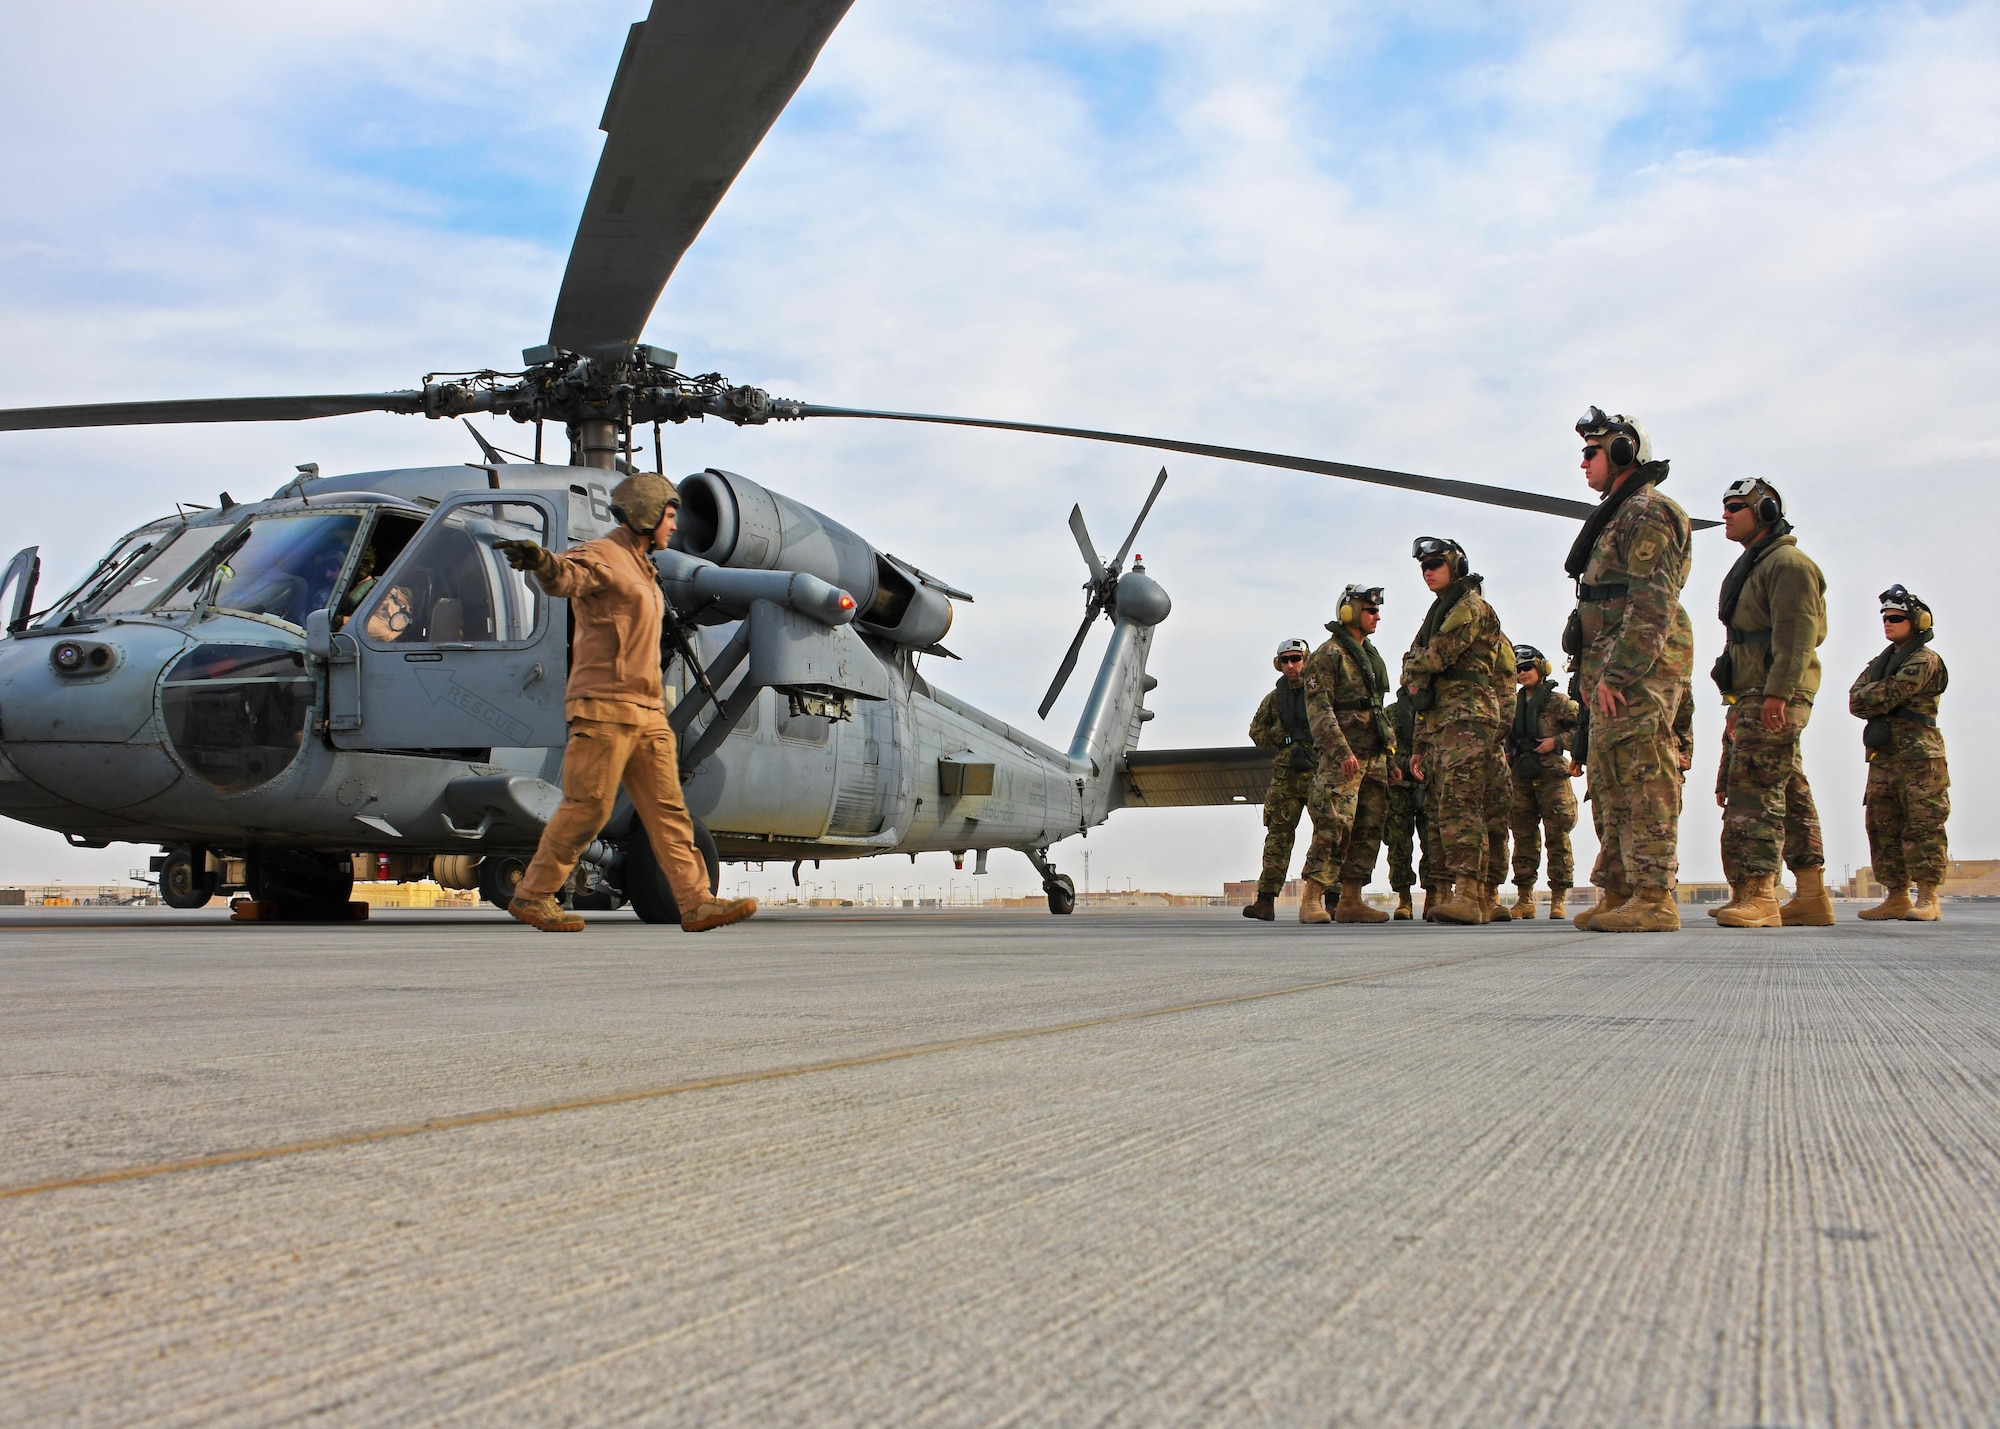 U.S. Air Force Airmen with the 379th Expeditionary Medical Operations Squadron prepare to board an MH-60 Seahawk at Al Udeid Air Base, Qatar, Jan. 23, 2017. Two Seahawks transported Airmen to the HMS Ocean, a Royal Navy ship, where they participated in a coalition exercise involving various medical drills at sea. (U.S. Air Force photo by Senior Airman Miles Wilson)